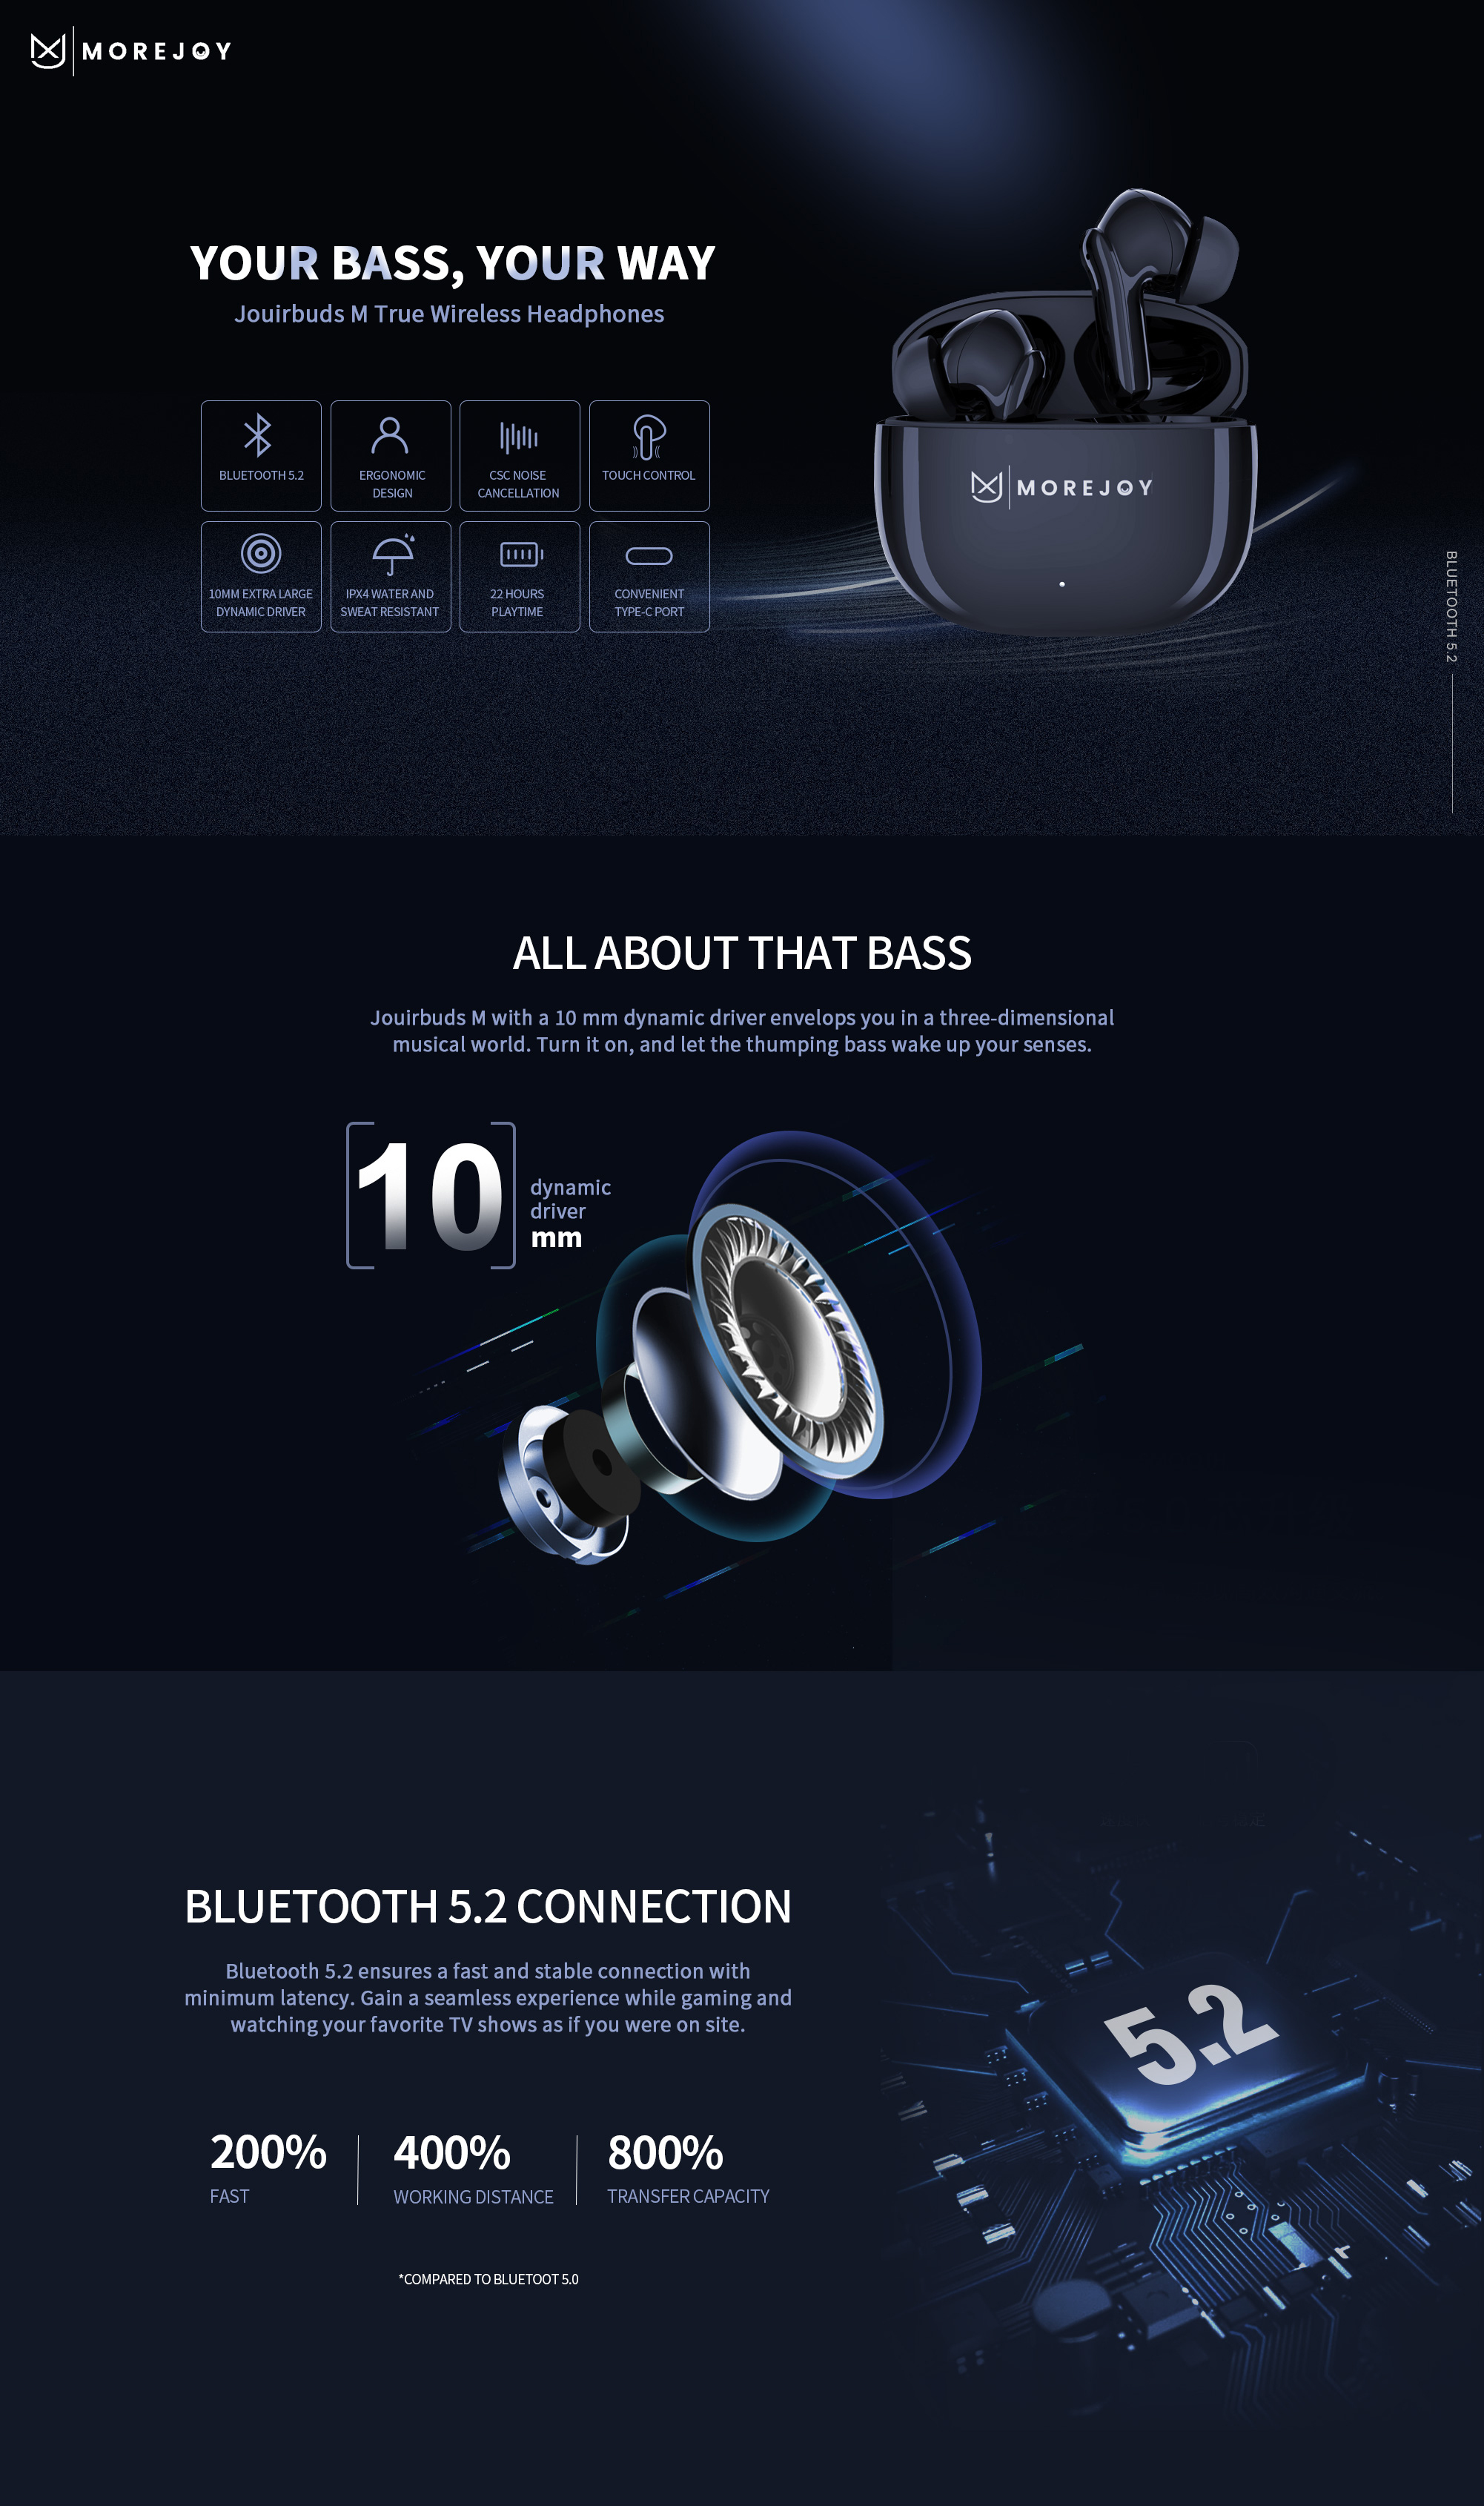 MoreJoy-MJ111-Bluetooth-headphones-wireless-earbuds-CSC-3-0-Self-Learning-ENC-noise-isolation-crystal-clear-sound-profile-22-hour-battery-IPX4-13